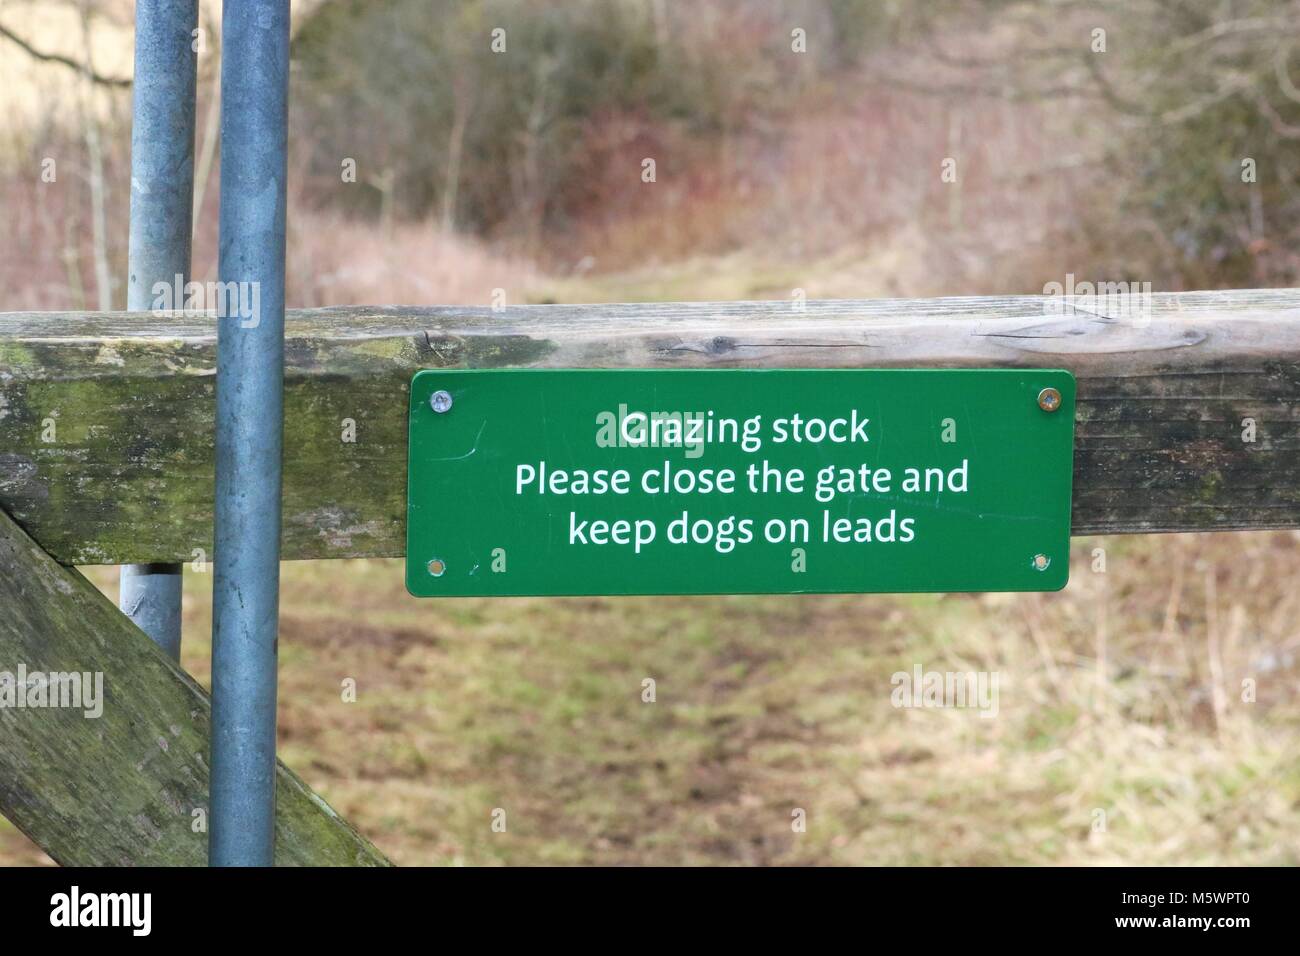 'Grazing stock please close the gate and keep dogs on leads' green sign on gate in countryside, UK. Stock Photo